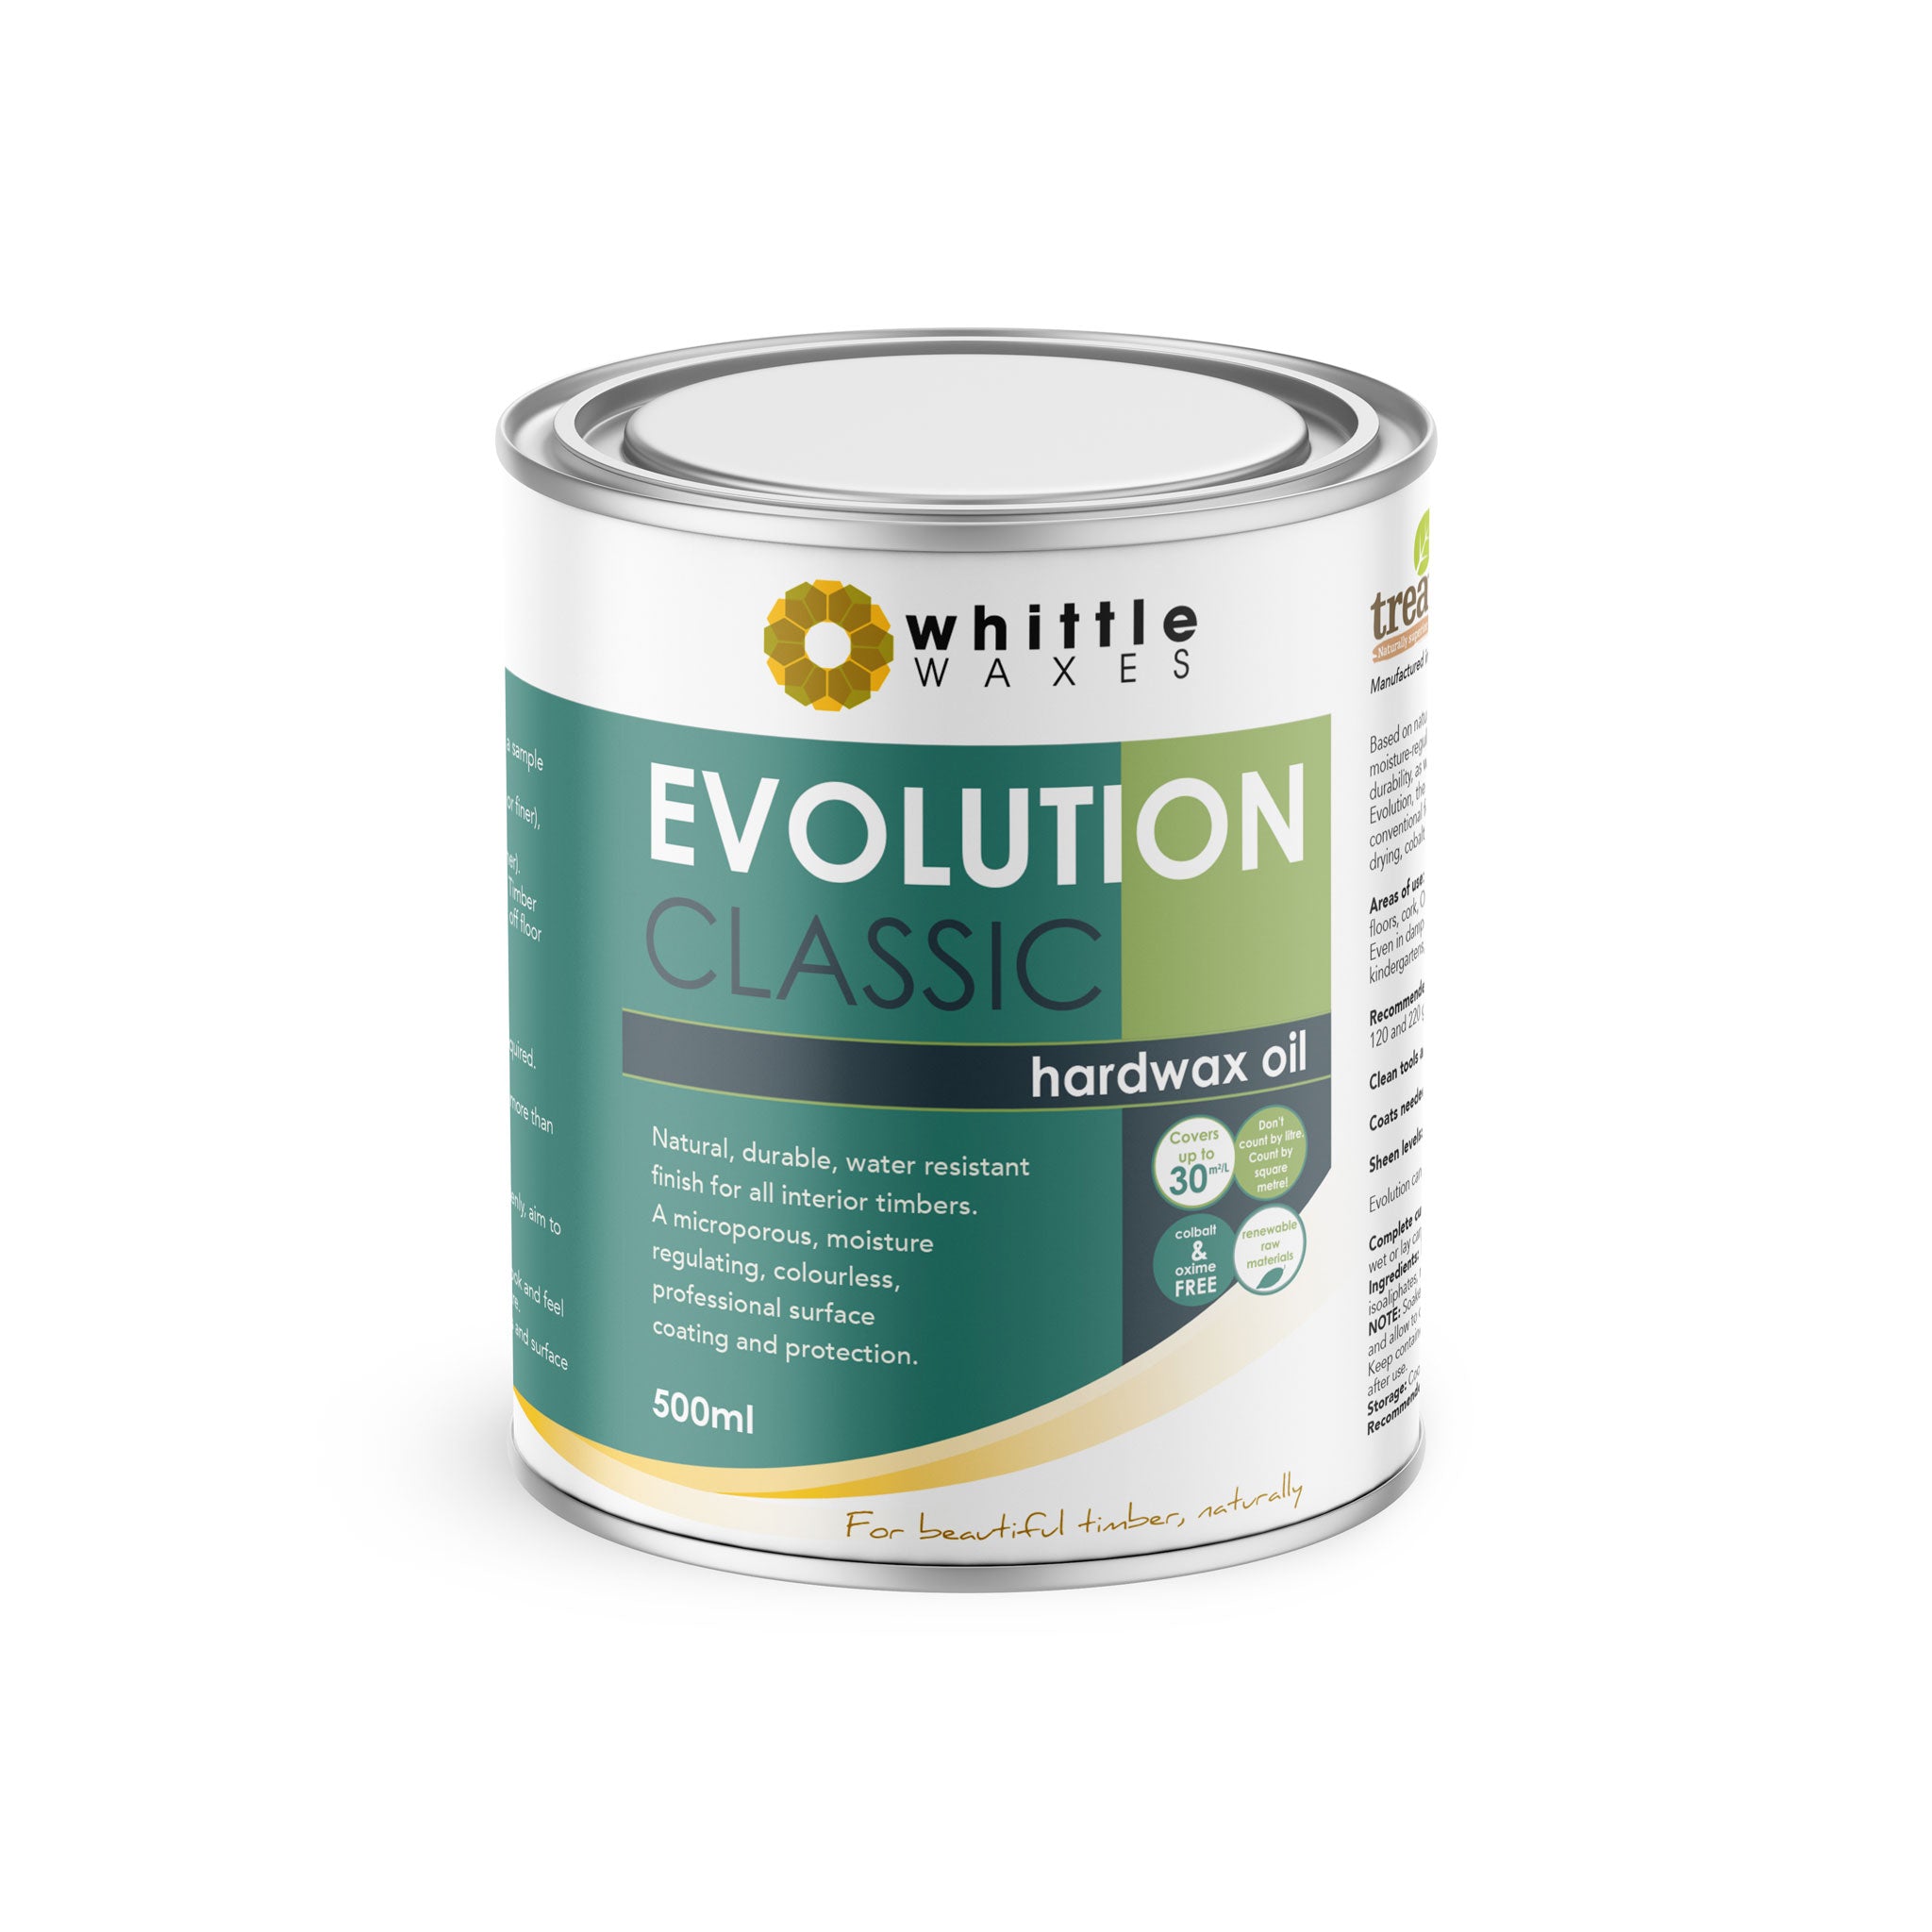 Whittle Waxes Evolution Hardwax Oil (Classic) - quality, durable, natural timber protection - 500ml